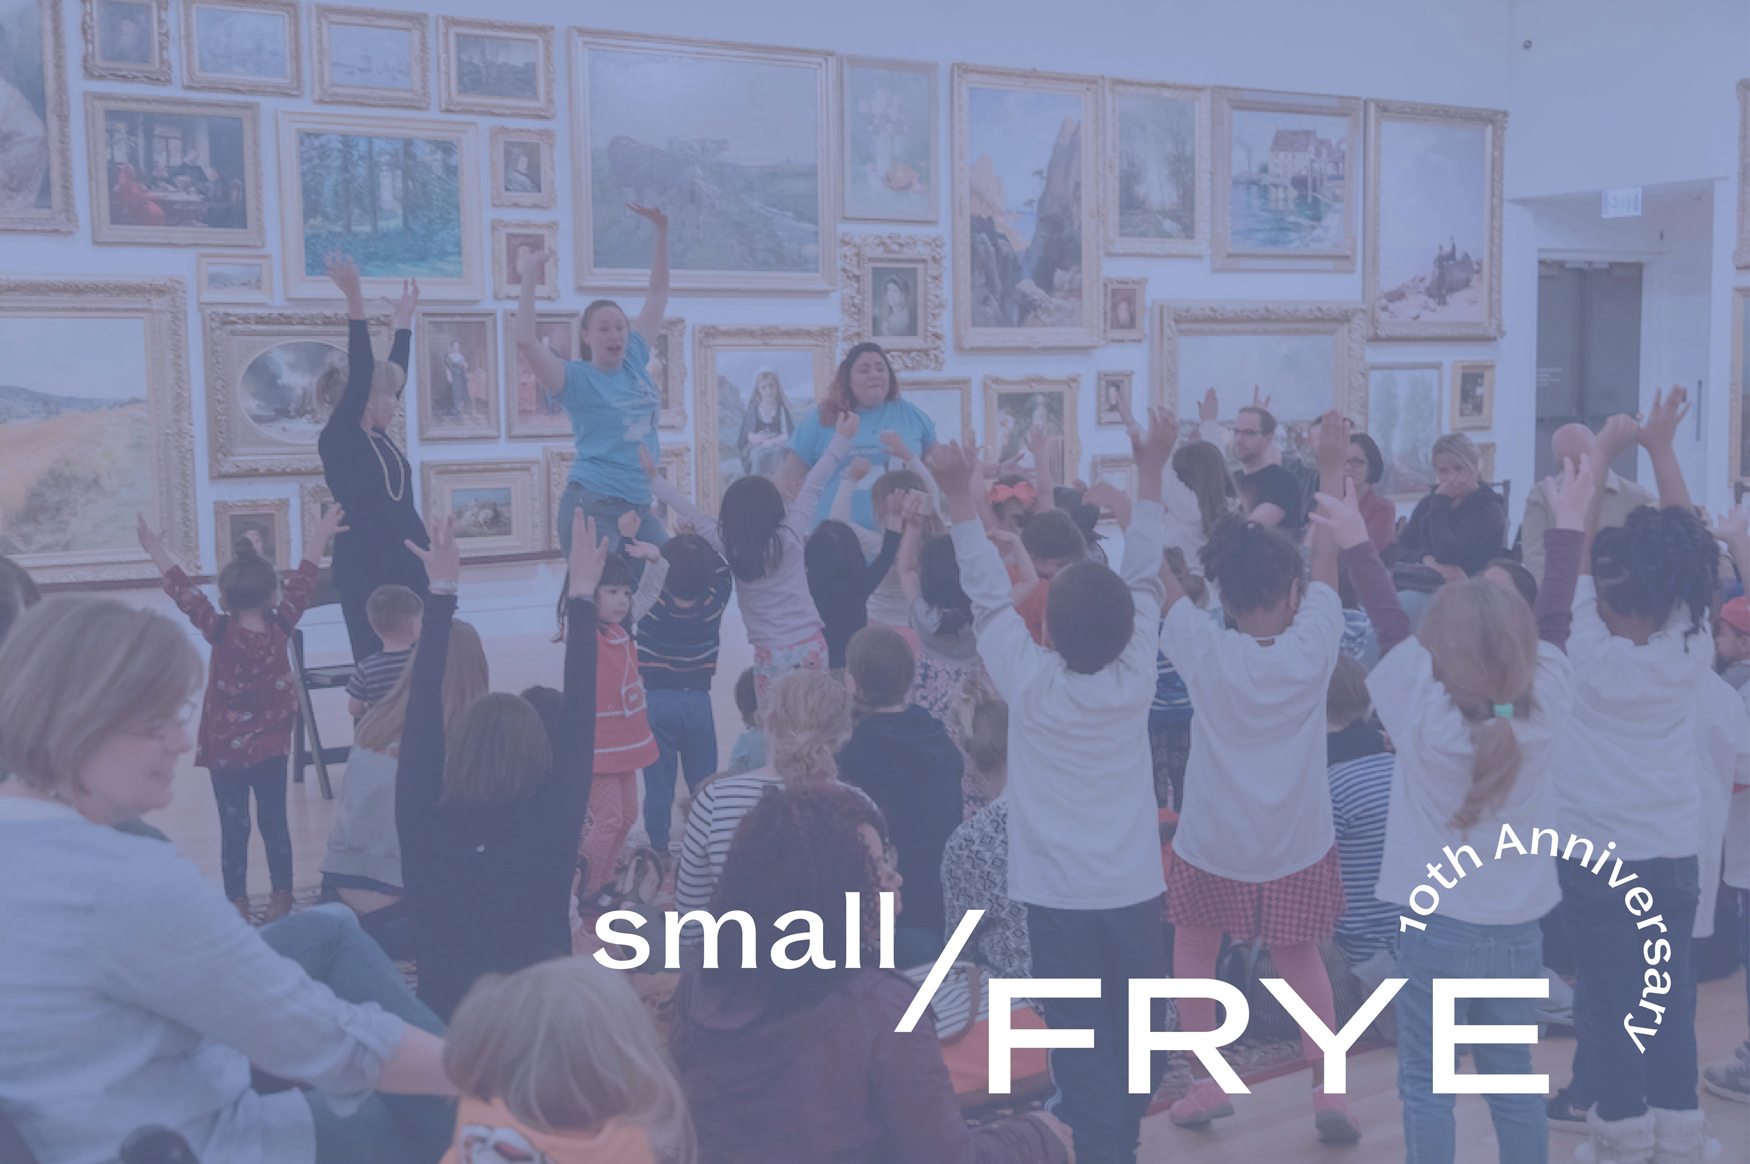 Photo of kids and teaching artists at a Small Frye program in the Frye Salon with a light blue color overlay and the words "small / FRYE 10th Anniversary" in white over the lower right corner of the image